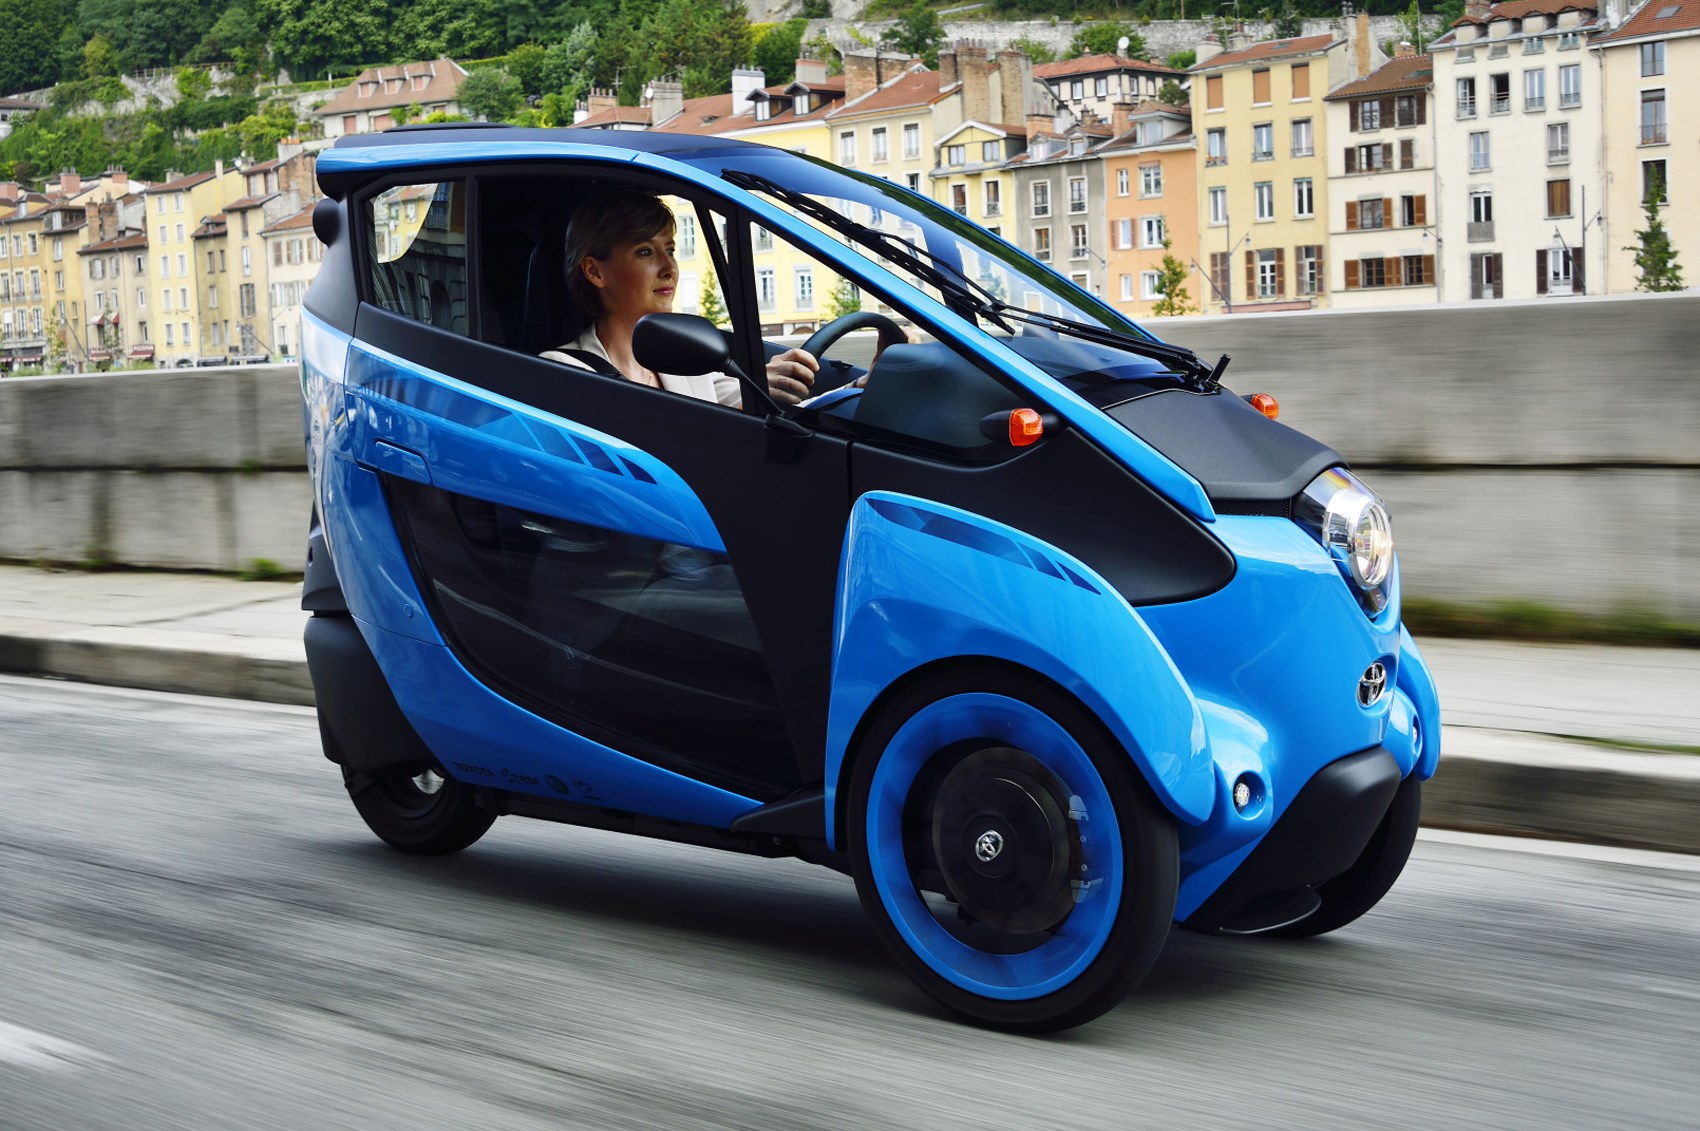 Toyota i-Road: does it work?